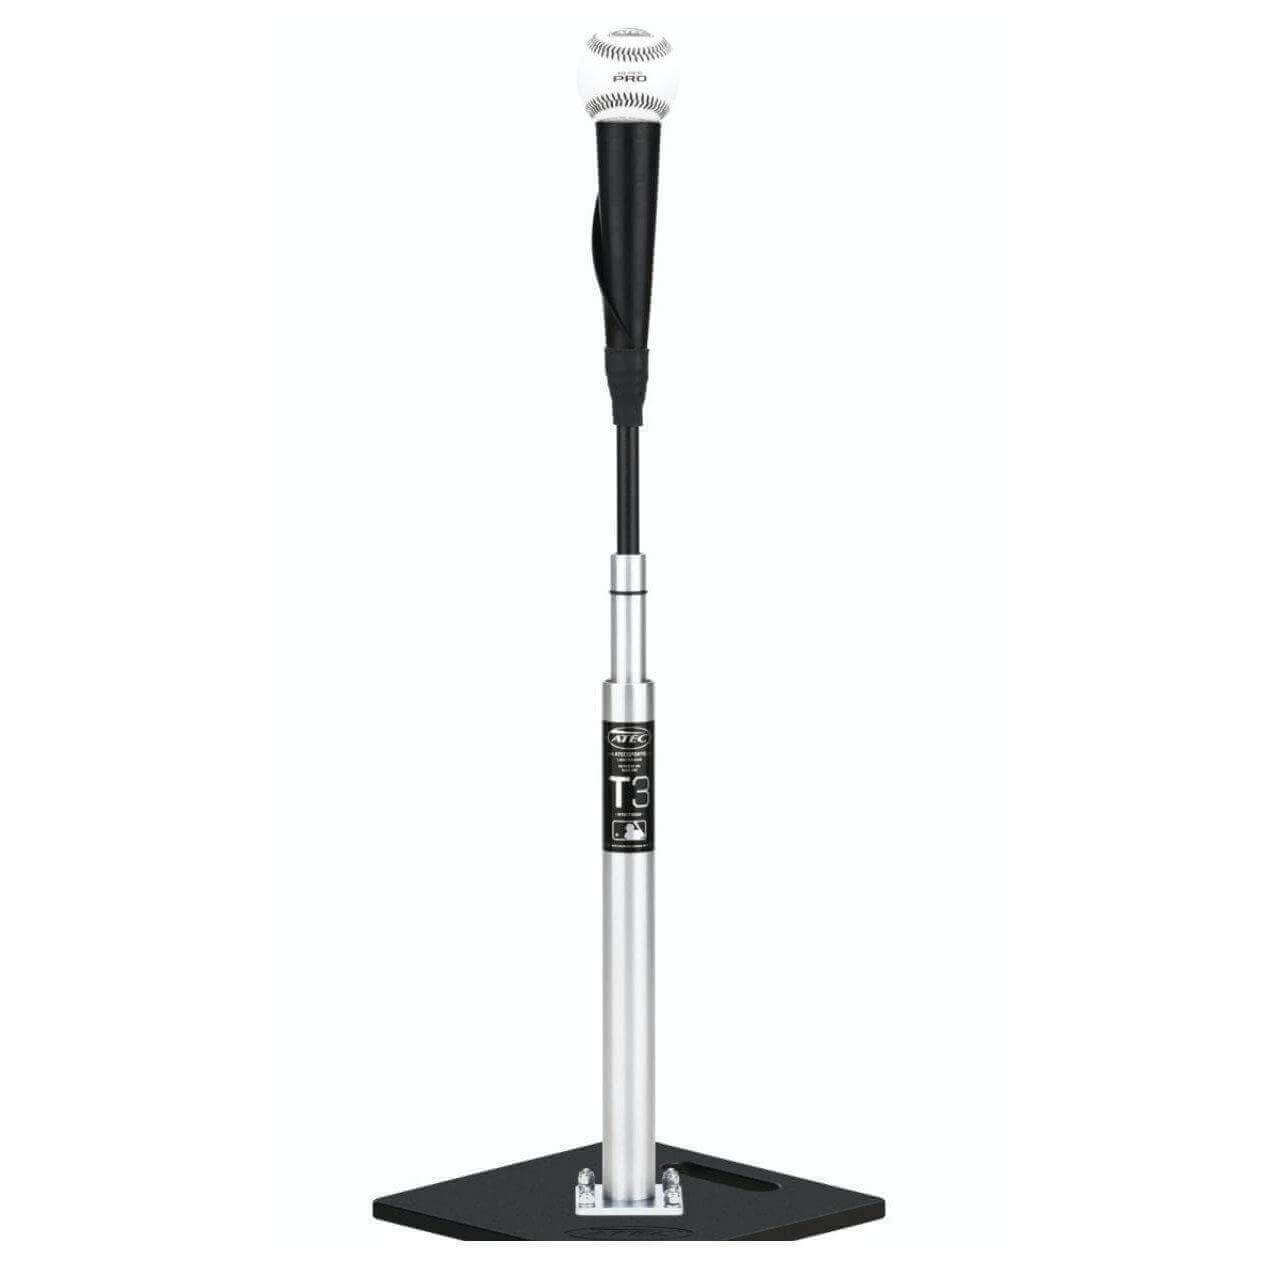 ATEC T3 Professional Weighted Batting Tee